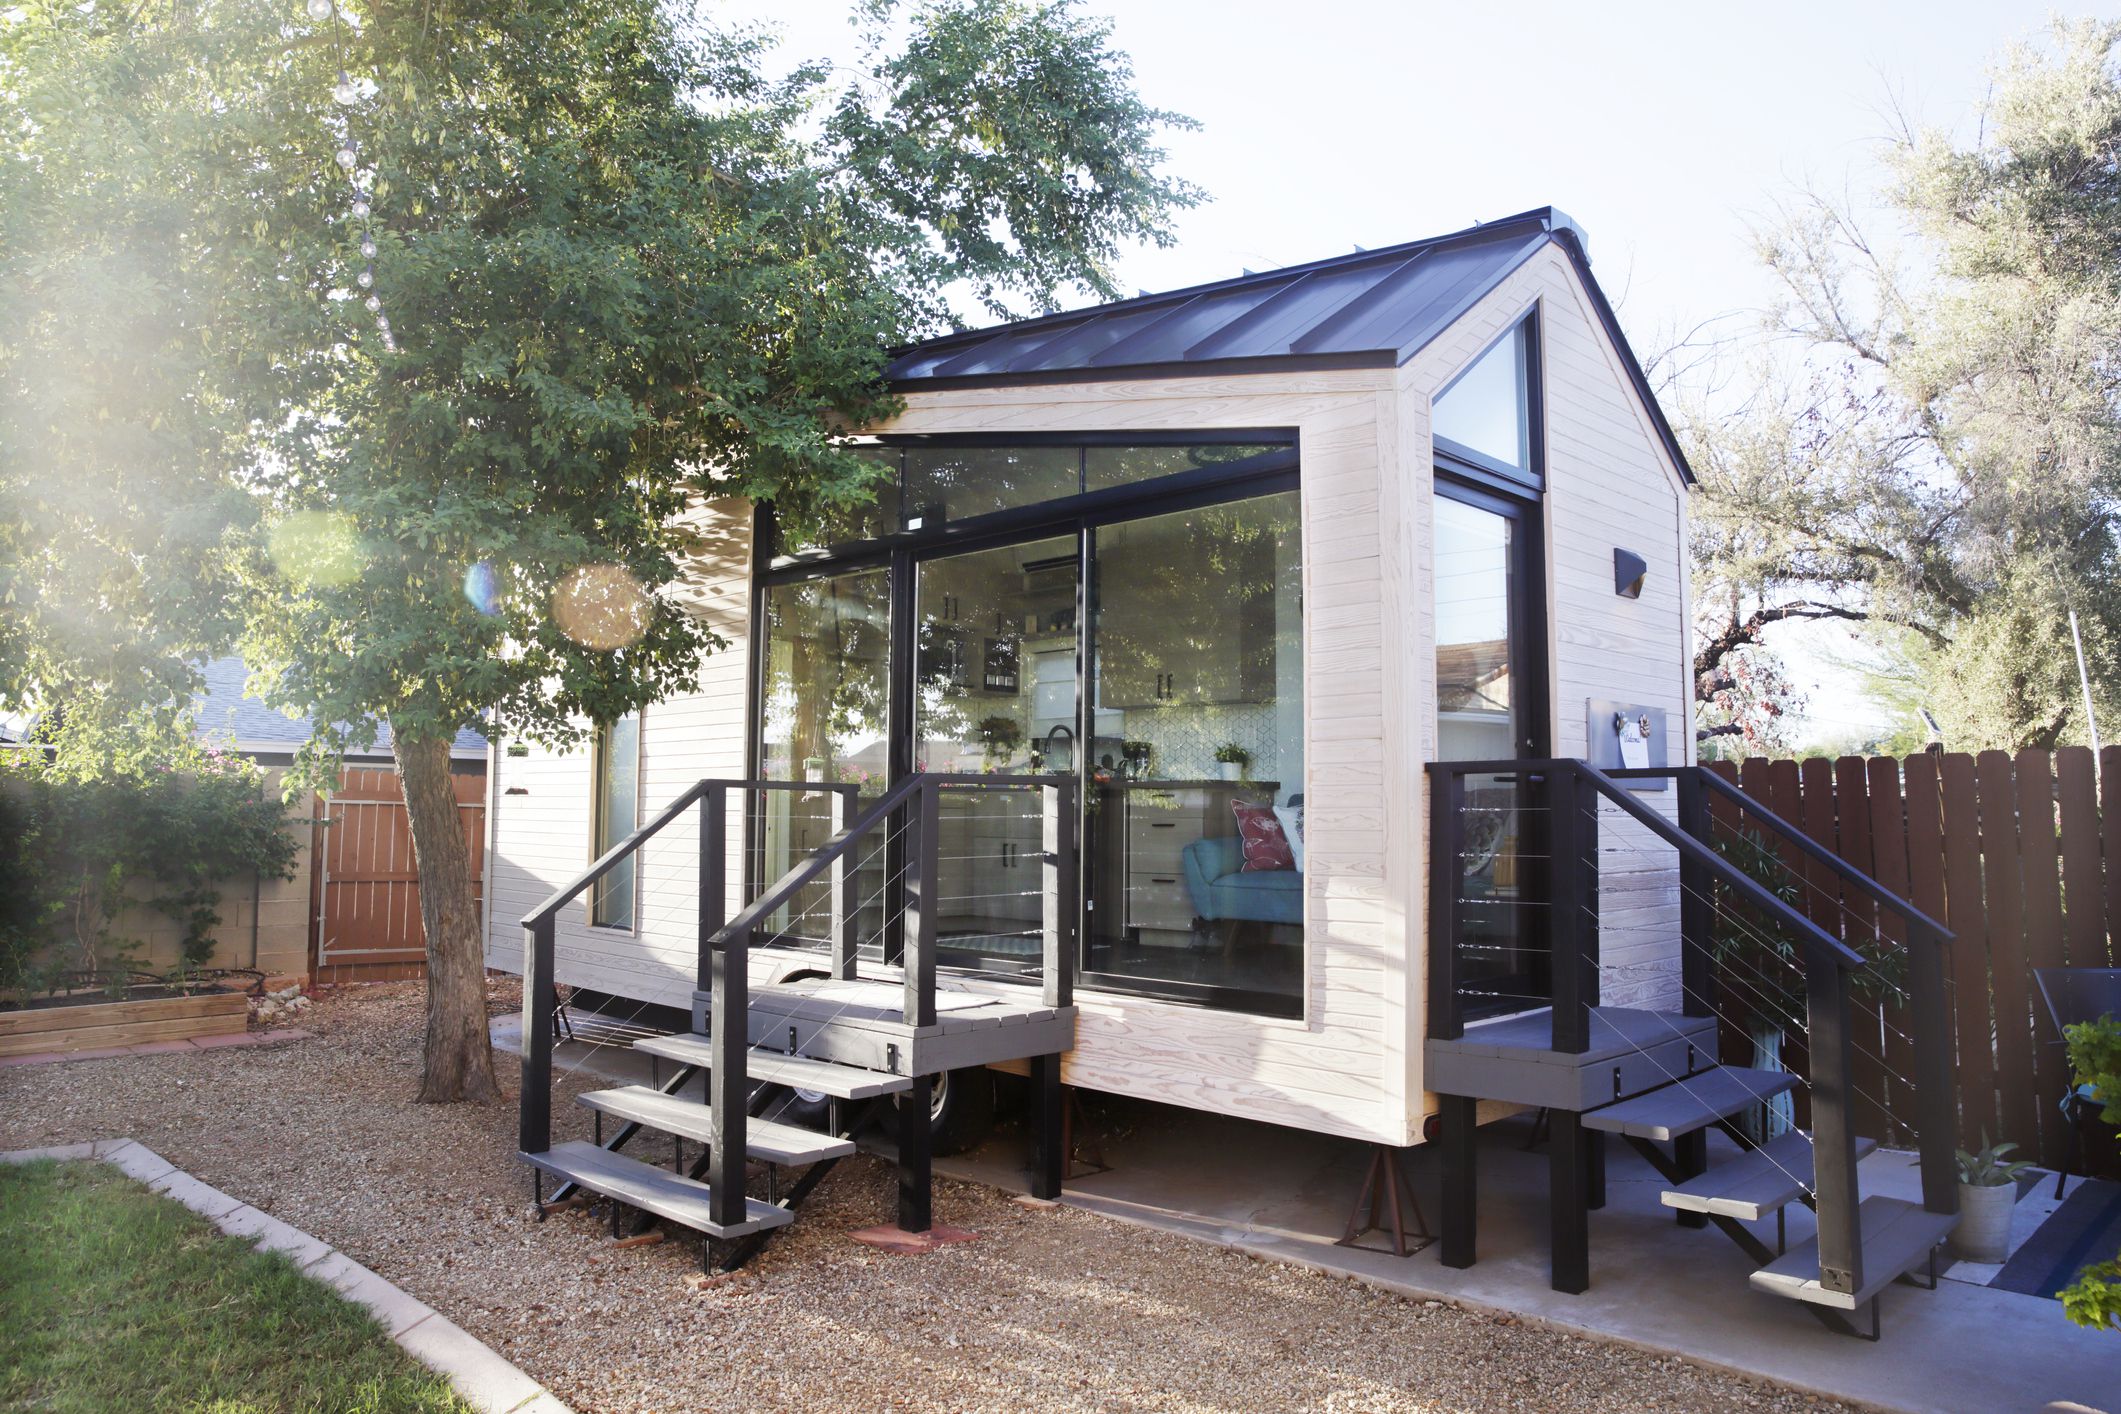 84 Tiny Houses That Will Convince You to Downsize